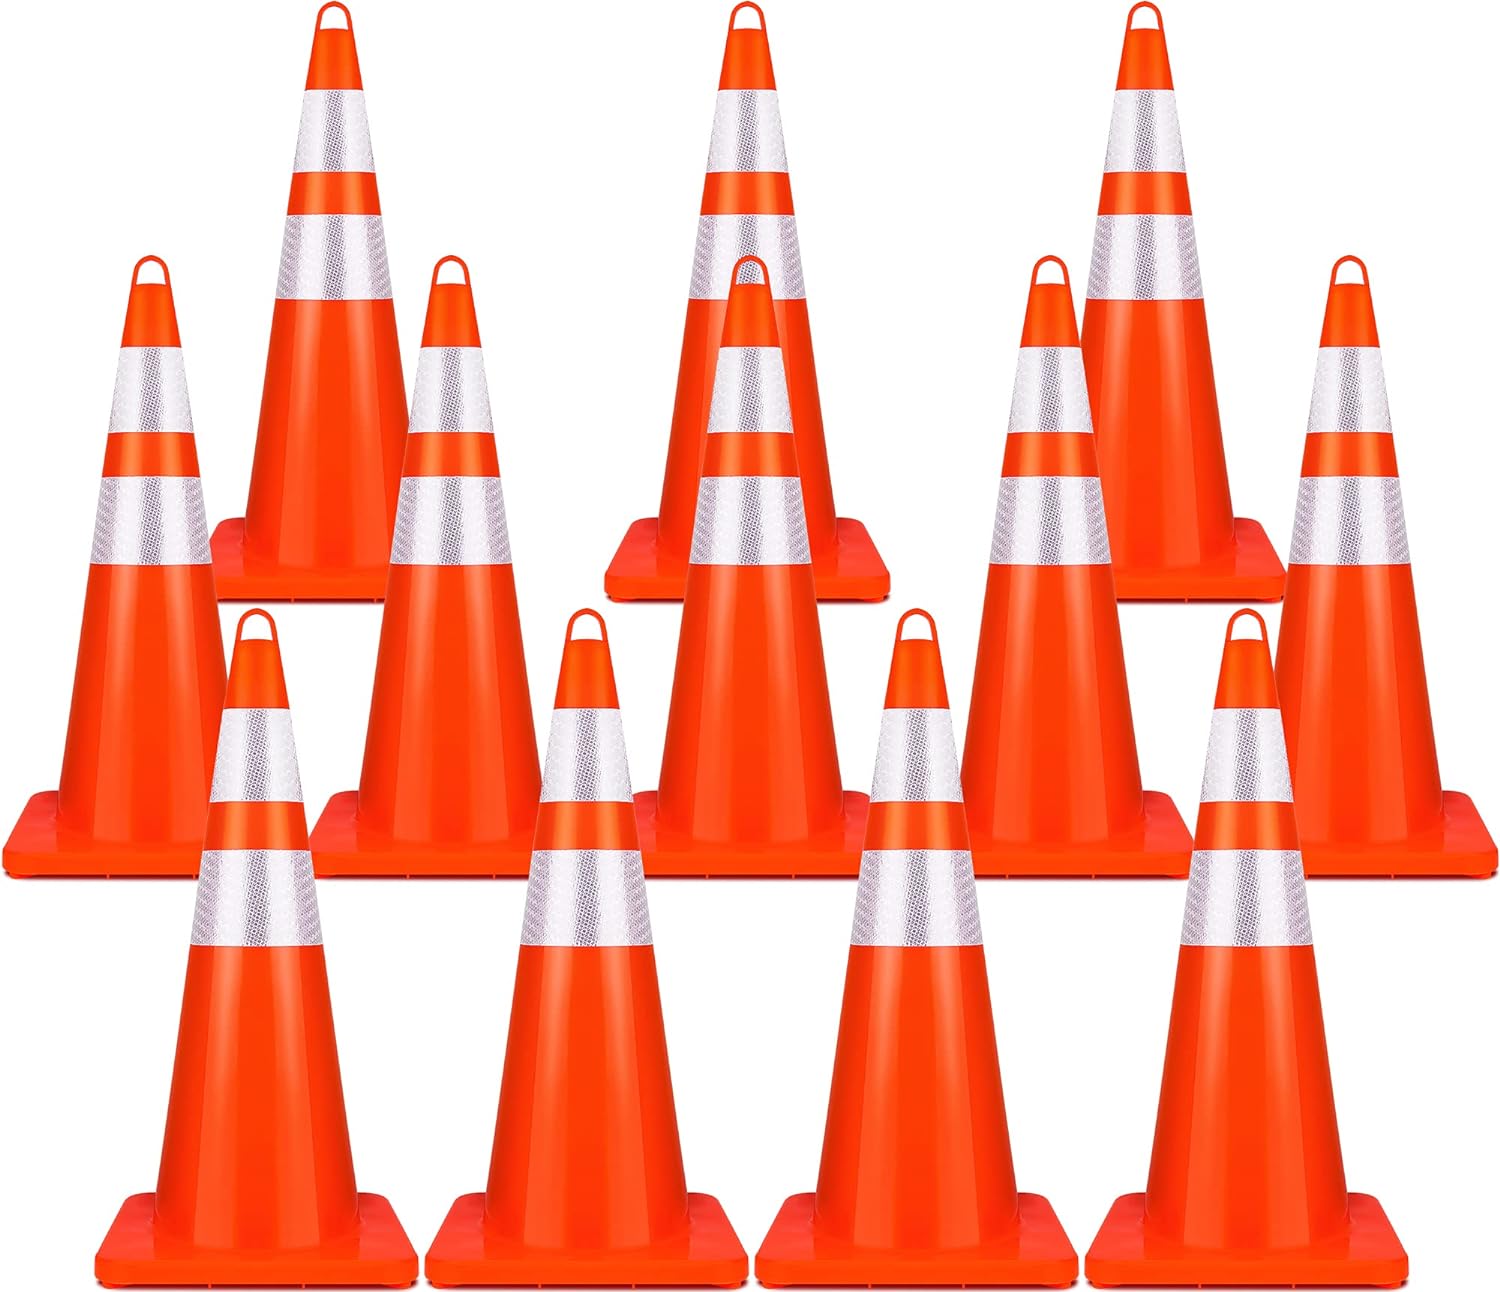 Rayfarmo 28 Inch Traffic Safety Cones,12 Pack Orange PVC Road Parking Cones Driveway Road Parking Unbreakable Construction Cone with Reflective Collars for Traffic Control